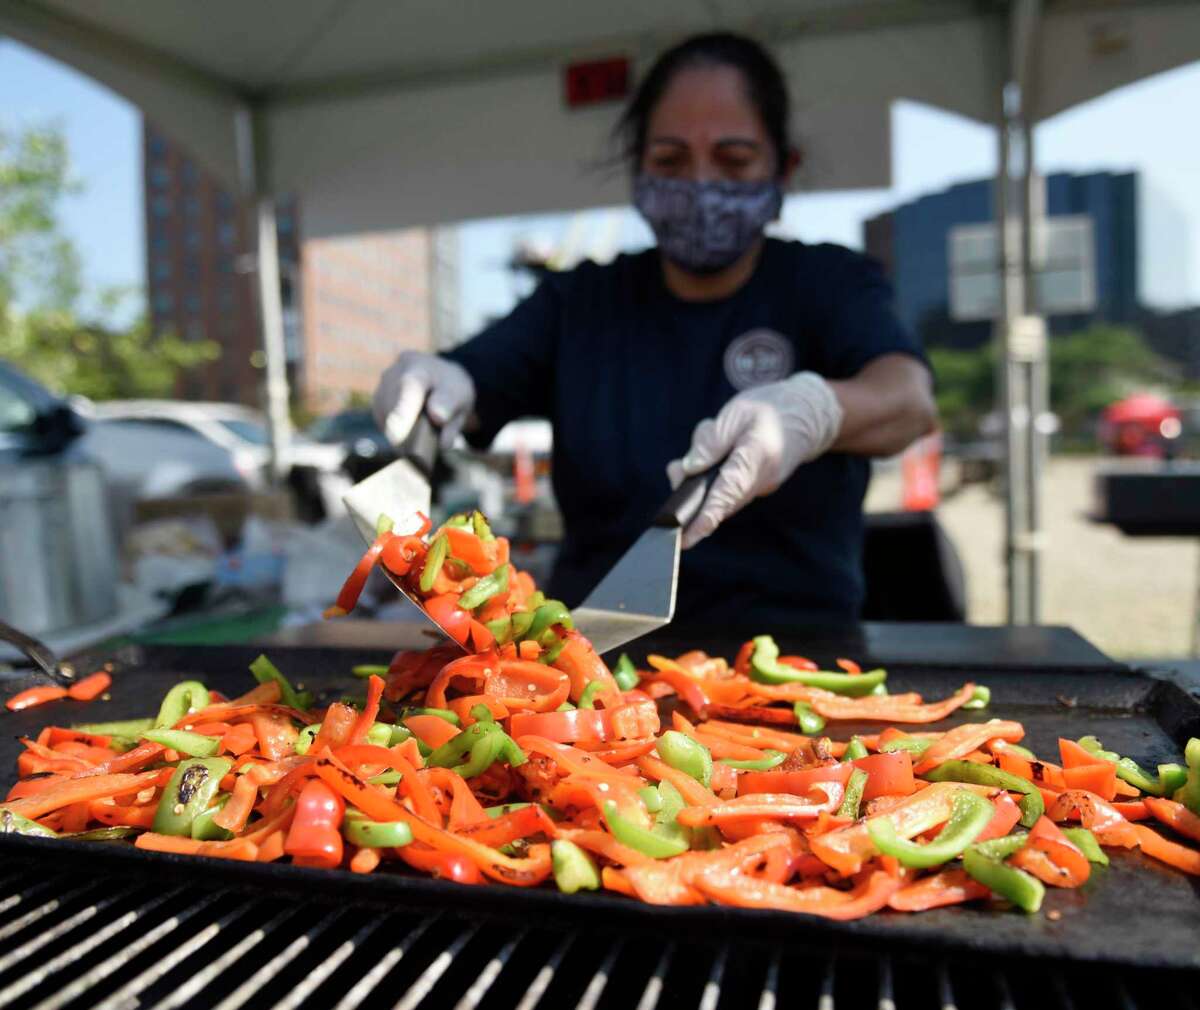 Margarita Capillo, of EB 222 Catering, grills peppers on the opening day of the 2021 Hey Stamford! Food Festival. The Hey Stamford! Food Festival will be back at Mill River Park in August, with cooking demonstrations by celebrity chefs Todd English and Aaron May.